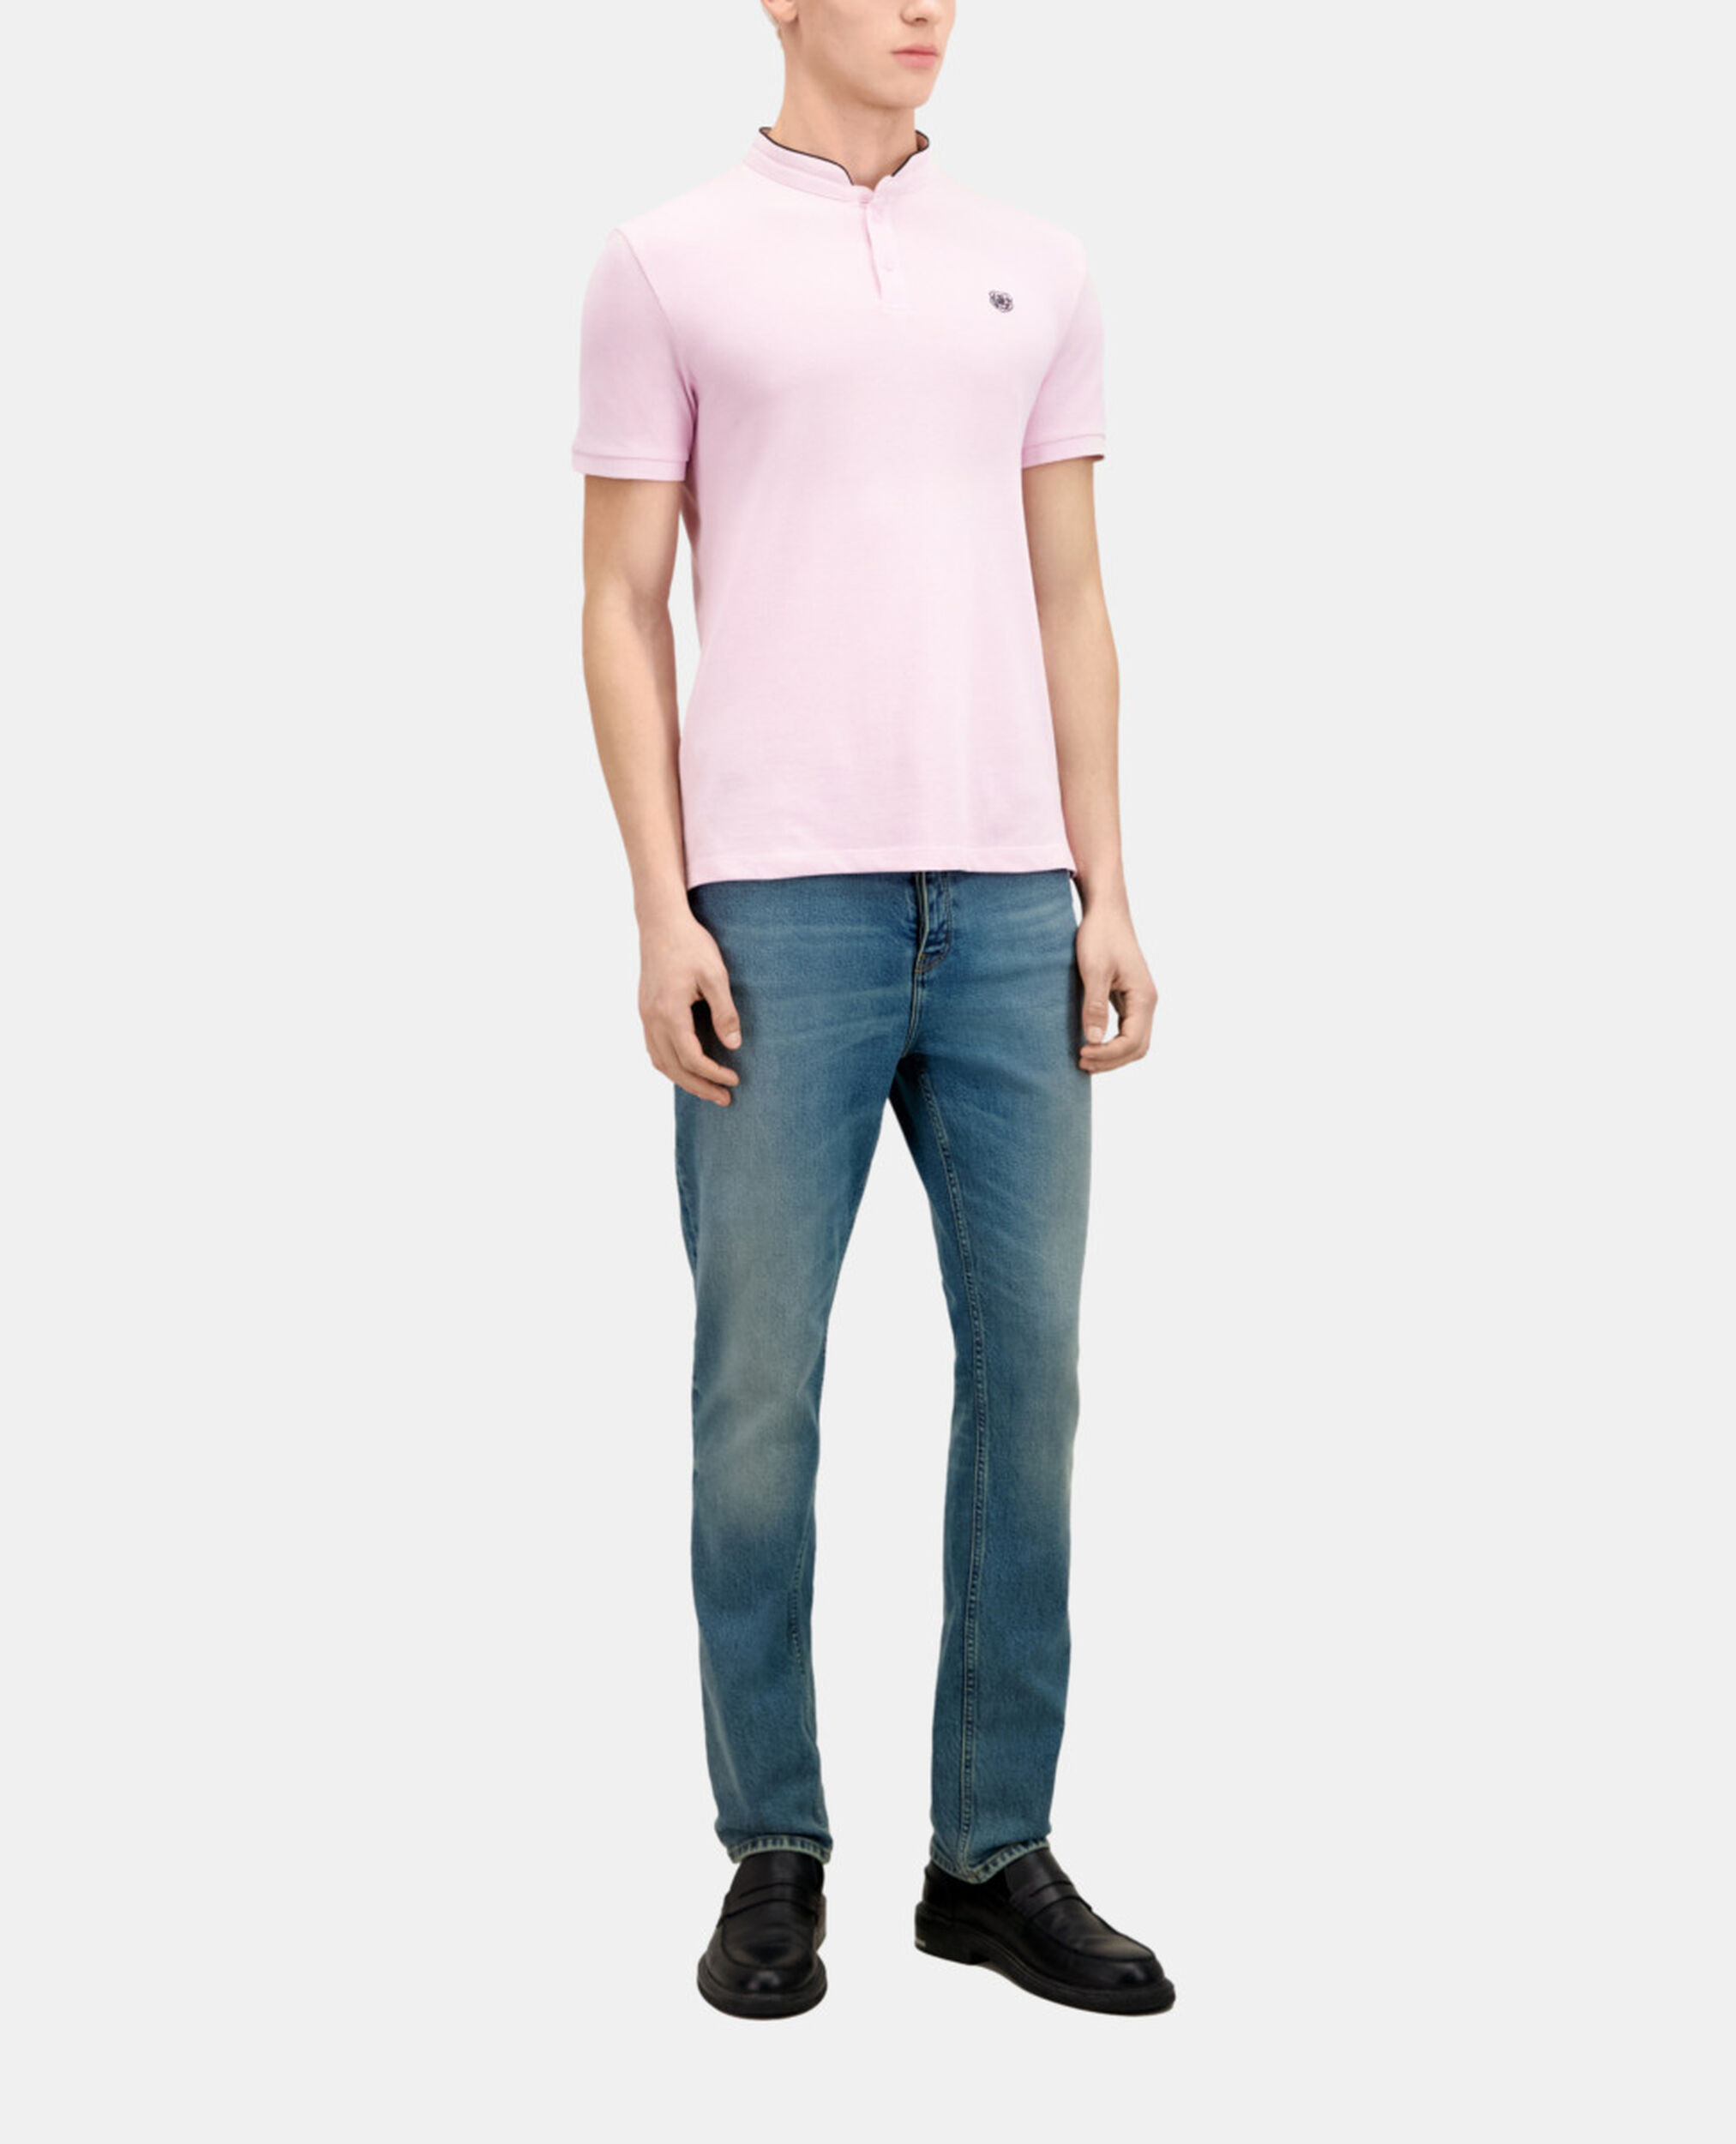 Pink cotton polo t-shirt, PALE PINK, hi-res image number null